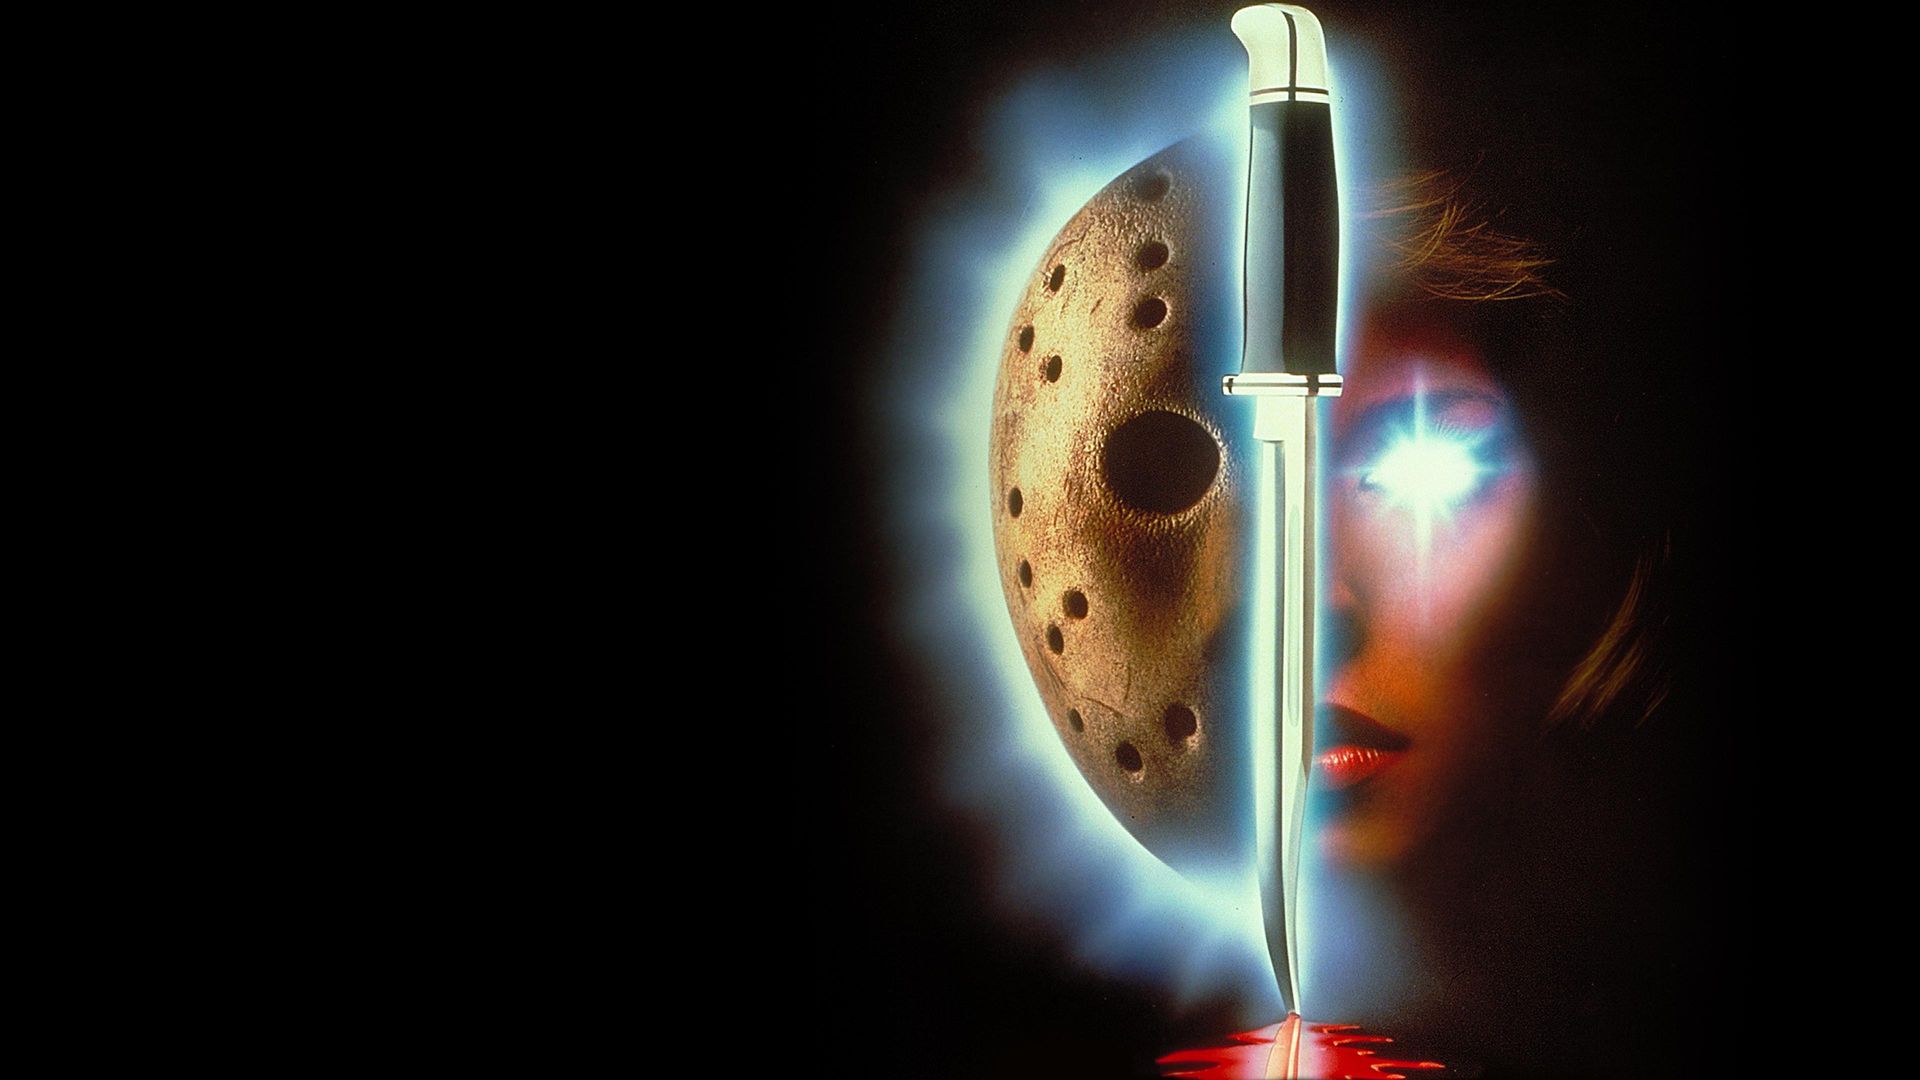 Friday the 13th Part VII: The New Blood Backdrop